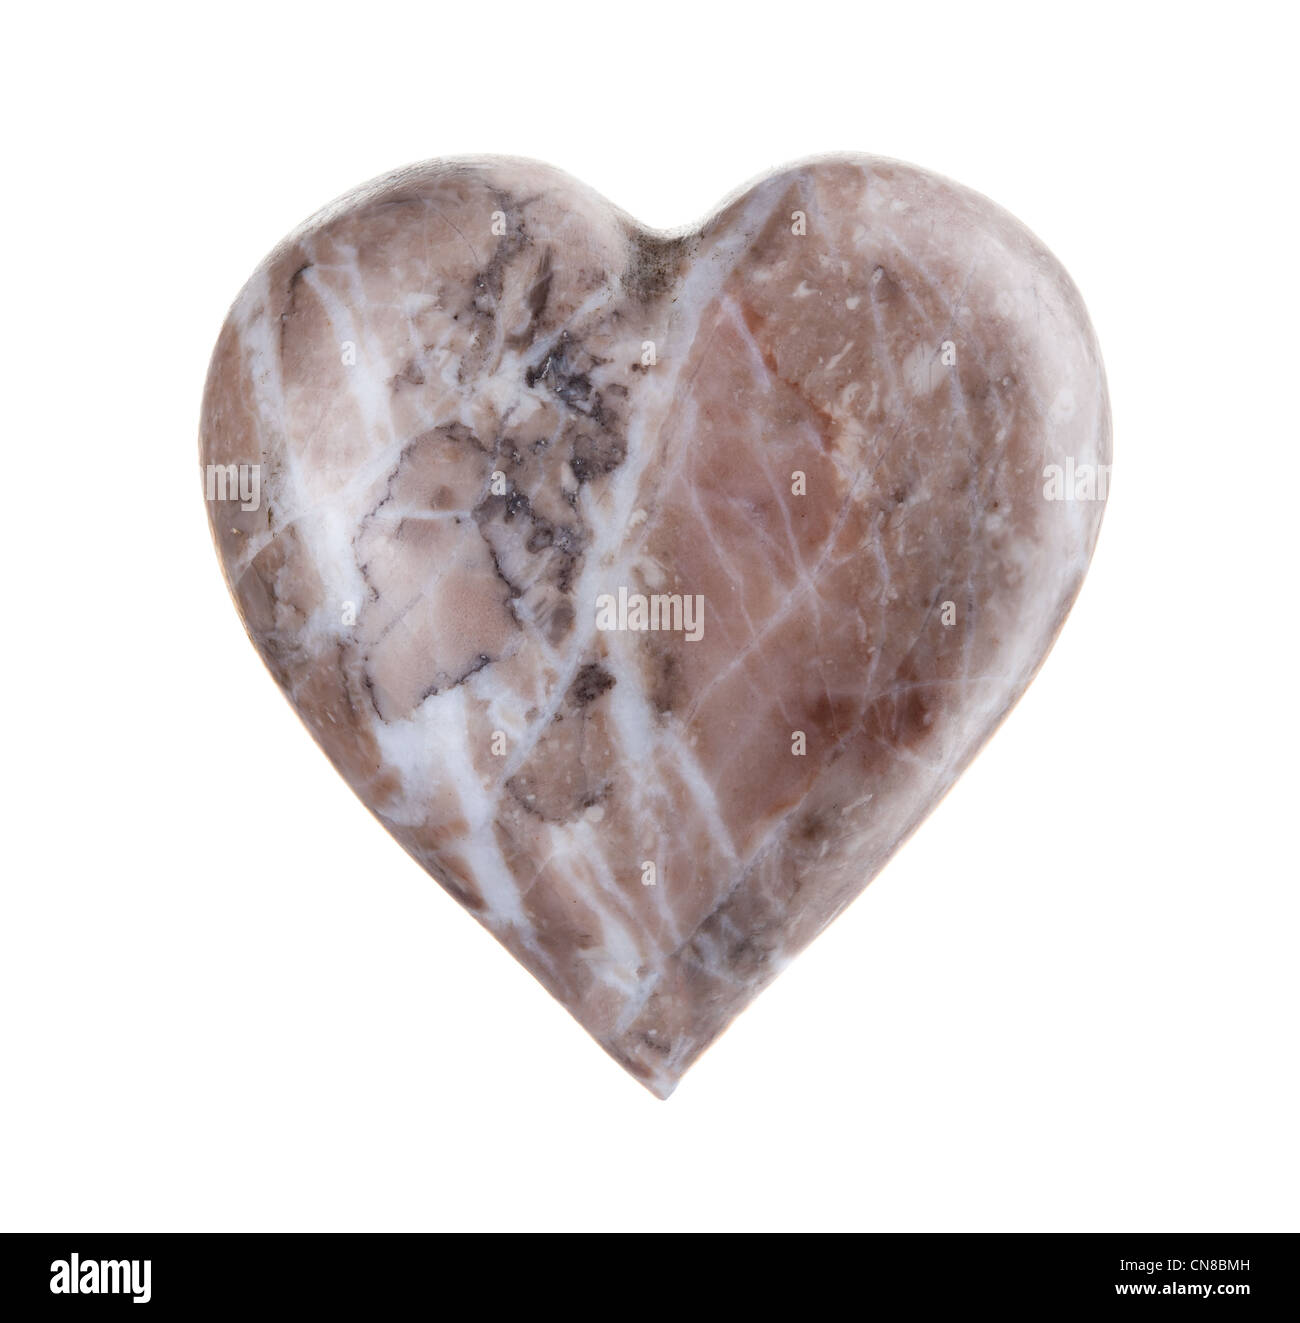 Heart shaped rock over a white background. Stock Photo